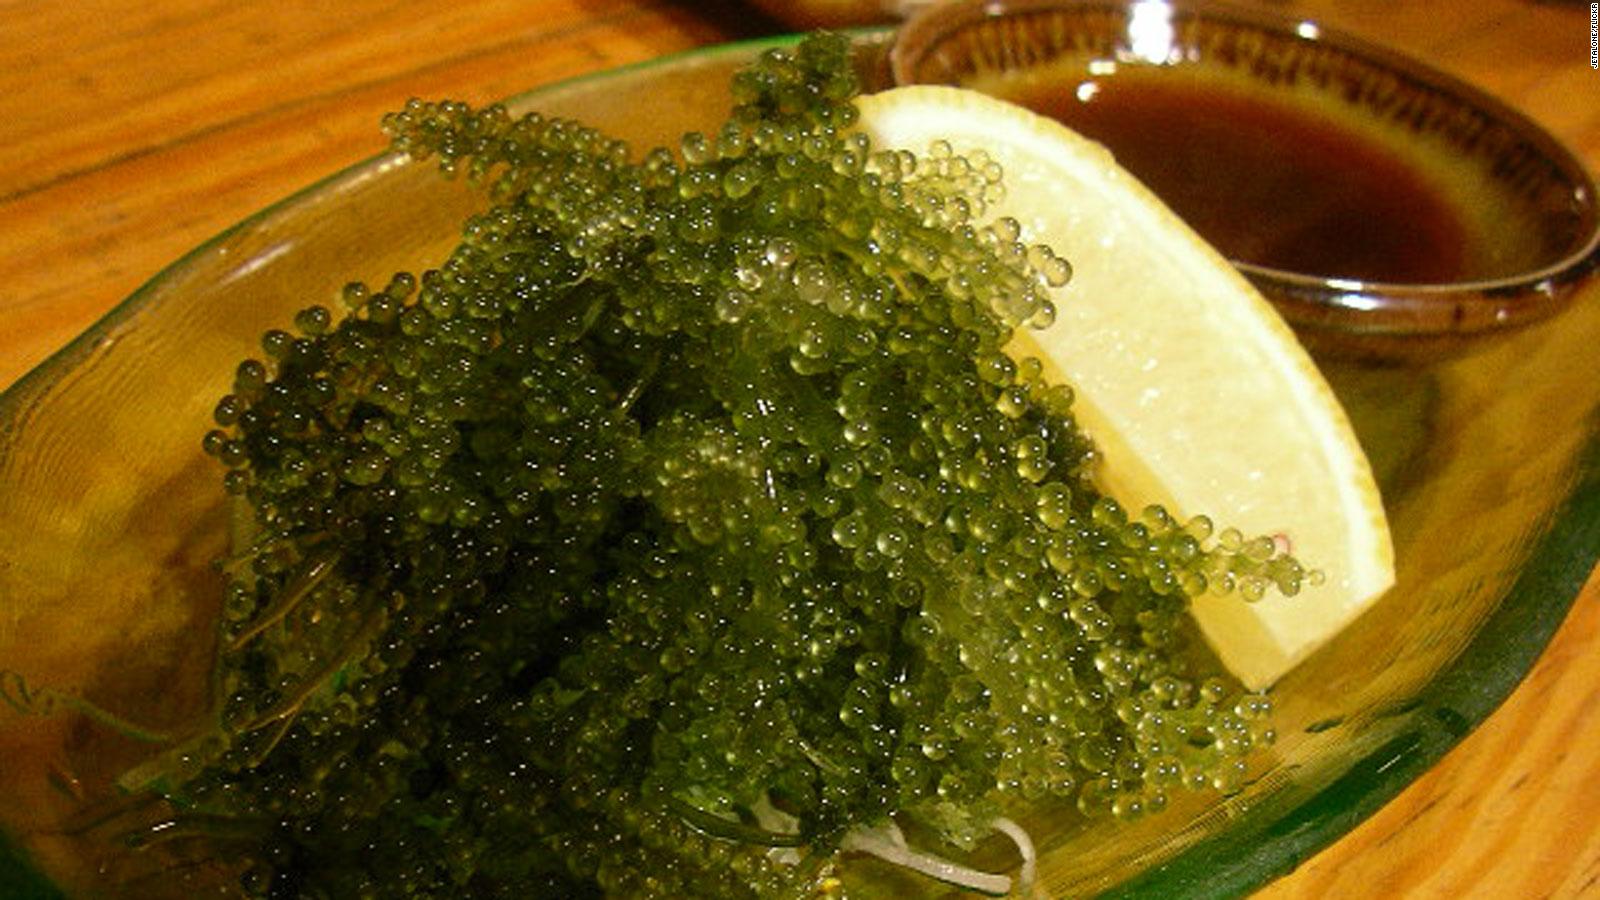 Okinawan Cuisine The Japanese Food You Don T Know Cnn Travel